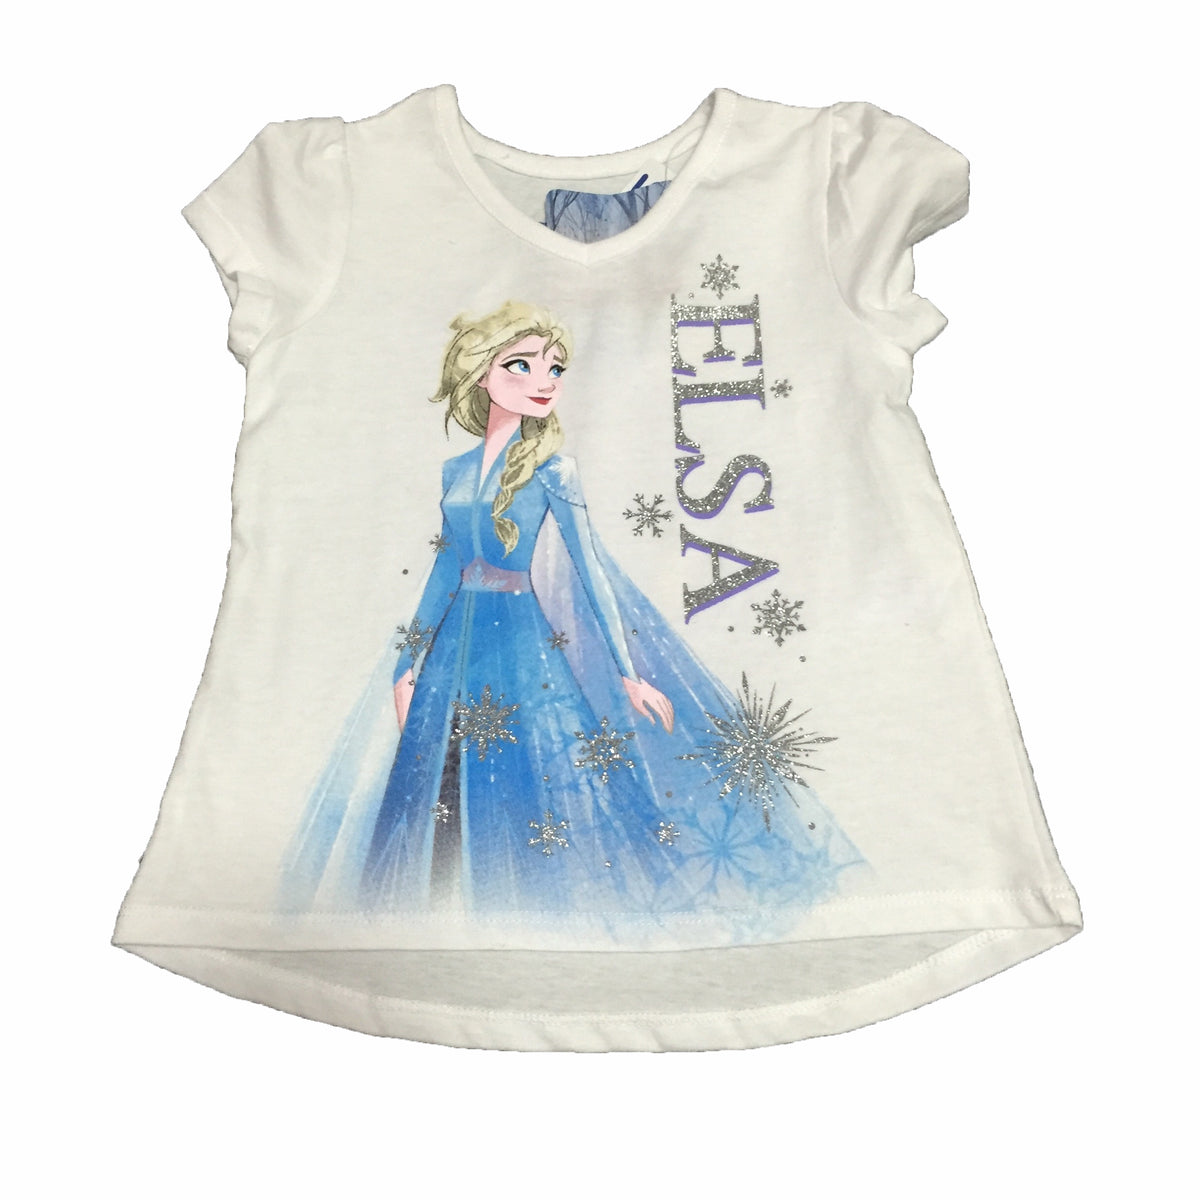 Girls Short-Sleeves Front and Back Shirt A20216I